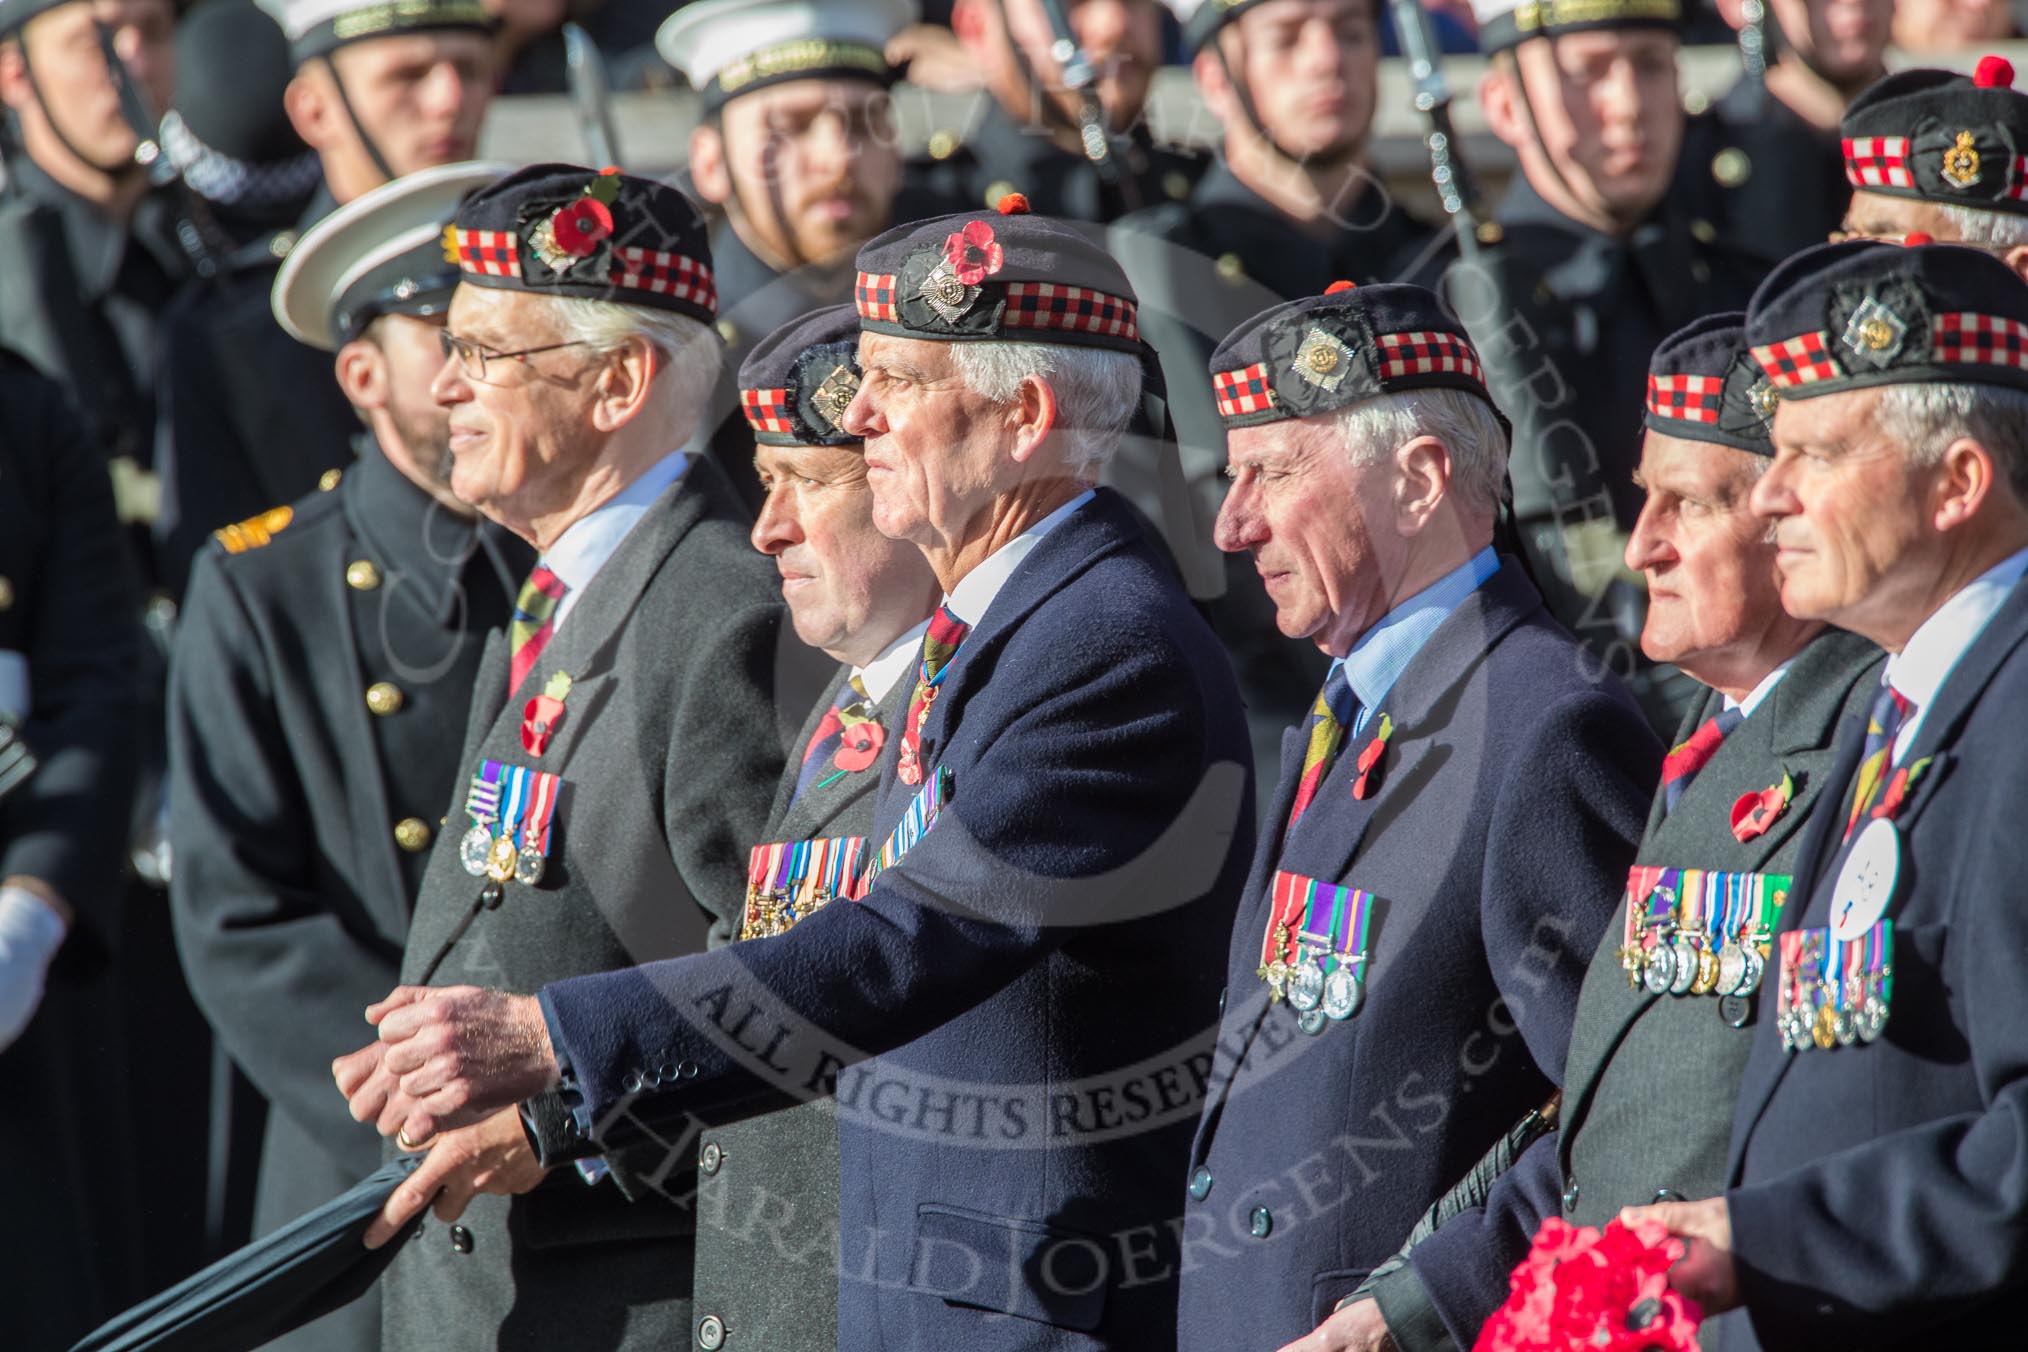 The Royal Scots Regimental Association (Group A8, 25 members) during the Royal British Legion March Past on Remembrance Sunday at the Cenotaph, Whitehall, Westminster, London, 11 November 2018, 11:56.